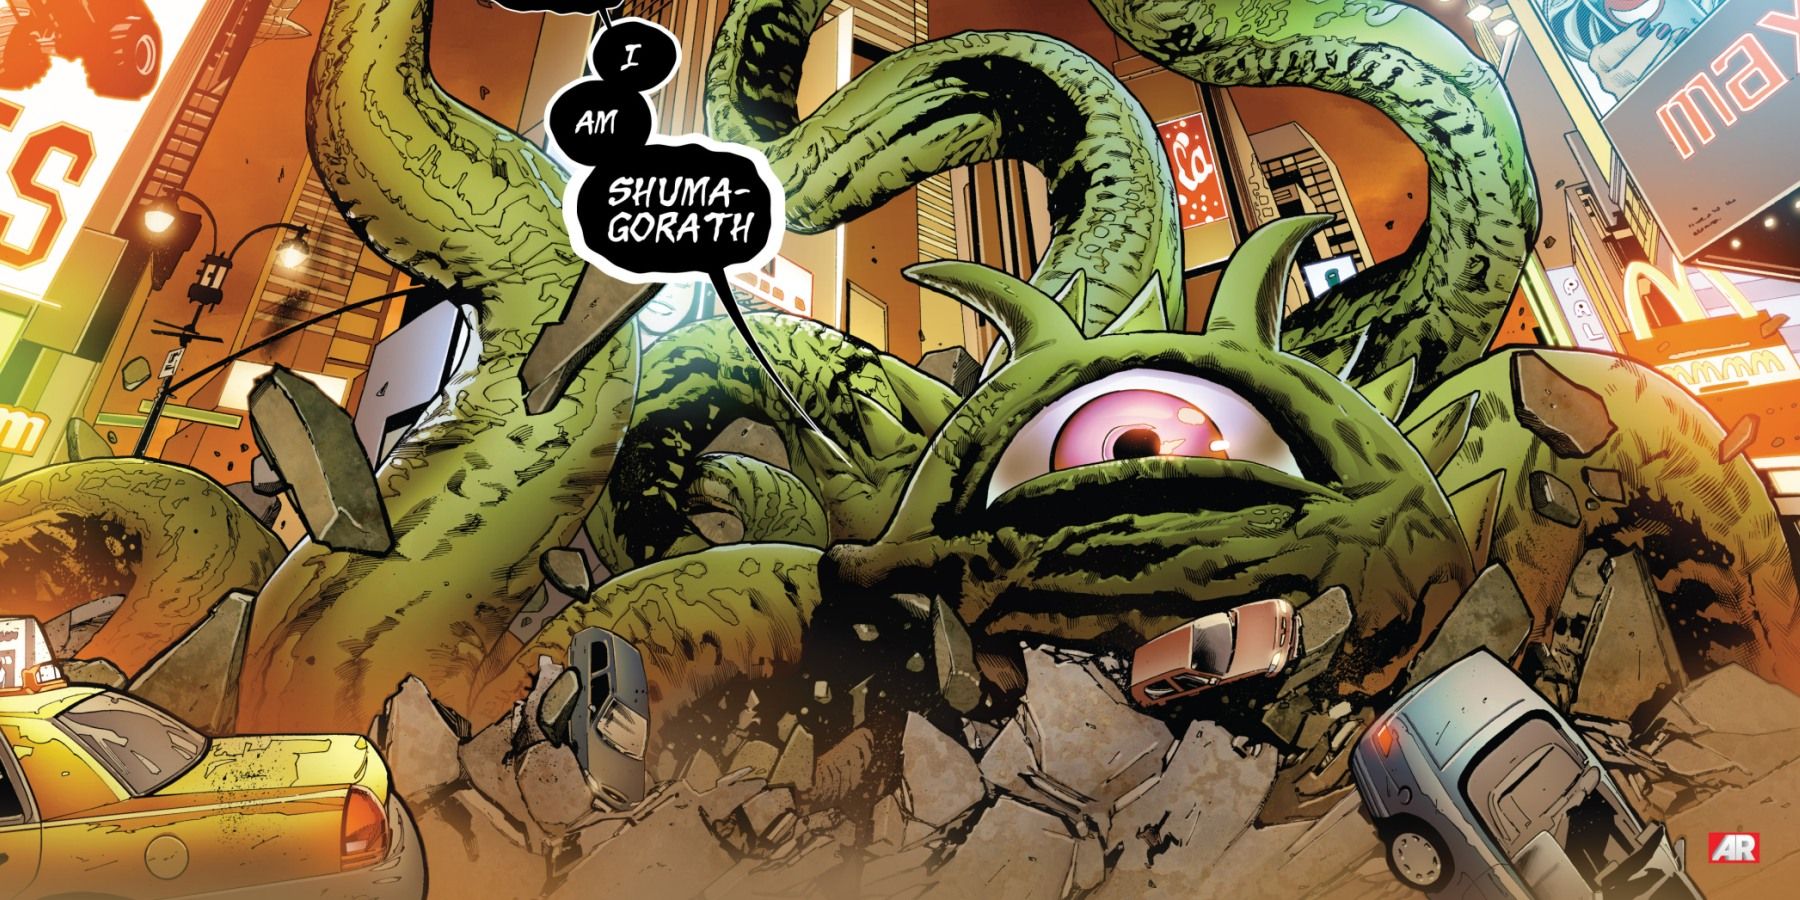 Shuma Gorath from Mighty Avengers vol 2 in the middle of the street.